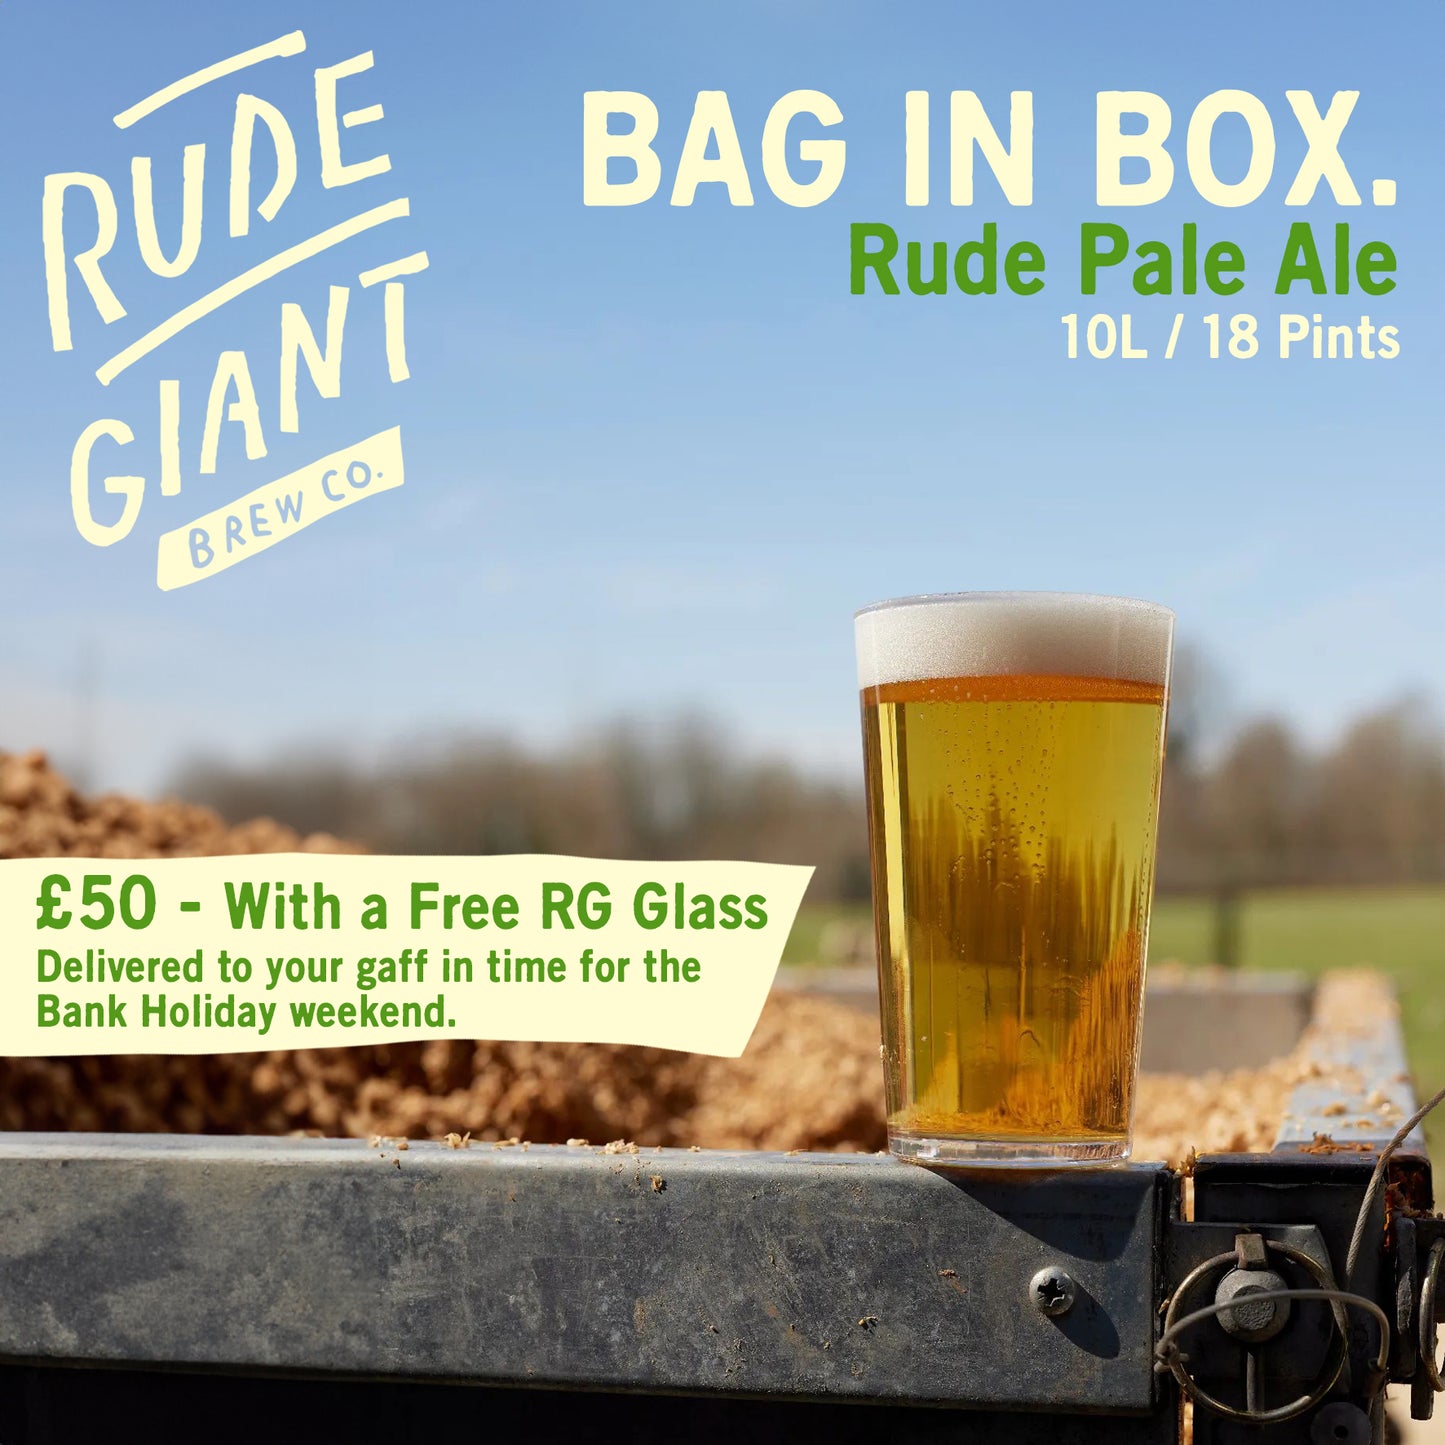 Rude Pale Ale | 10L Bag in Box | Free Delivery to SP and BA12 postcodes